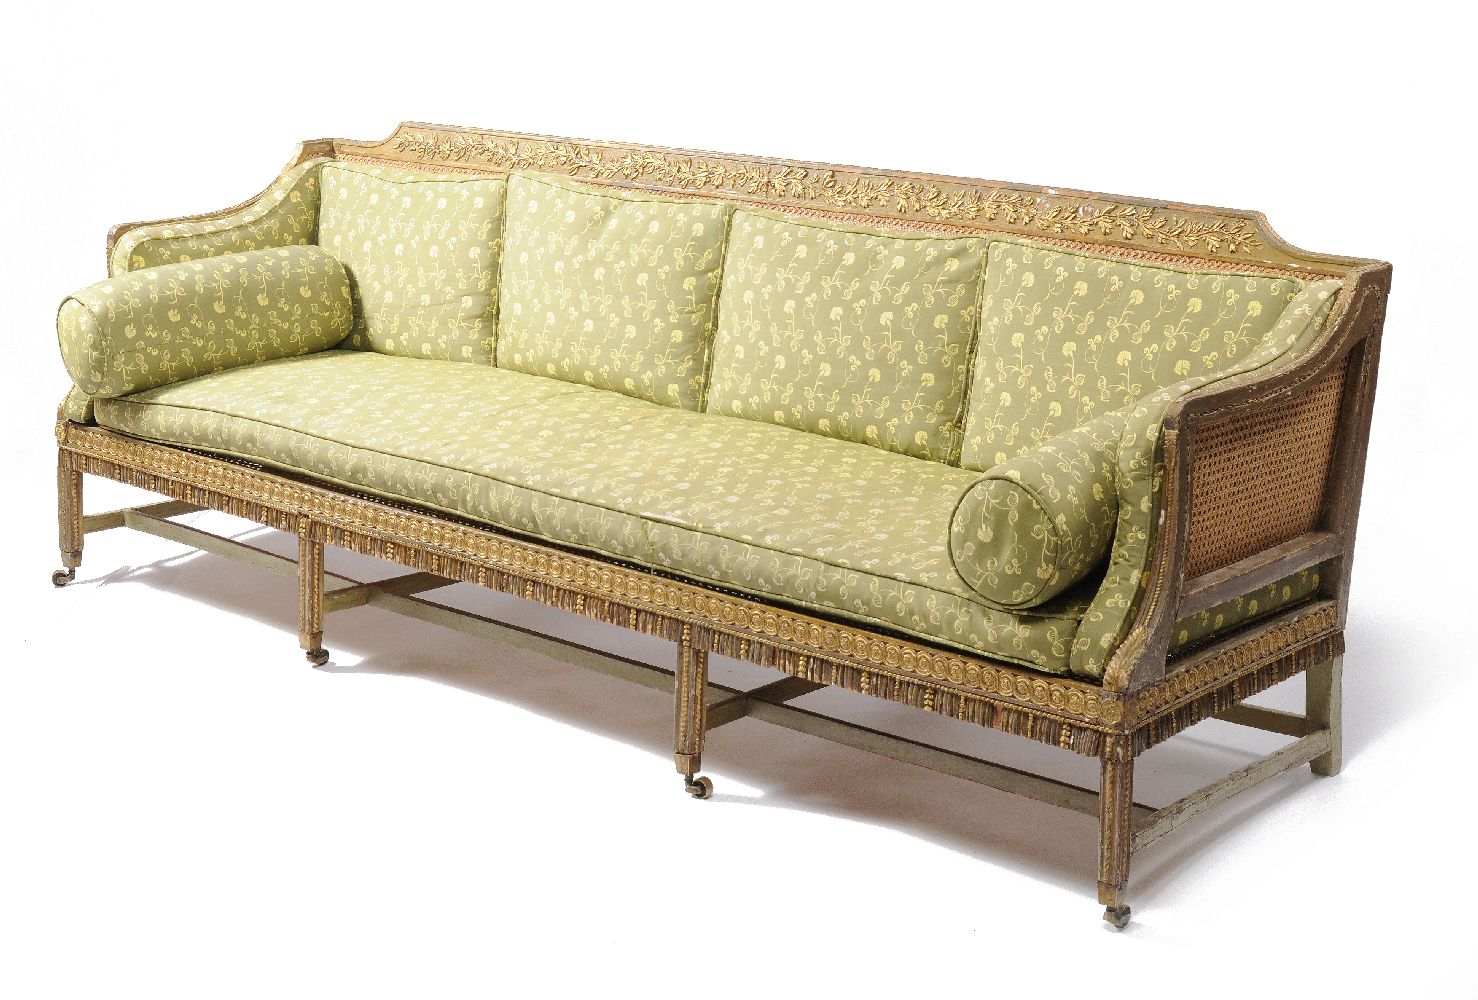 A George III gilt and green painted carved wood sofa - Image 2 of 5